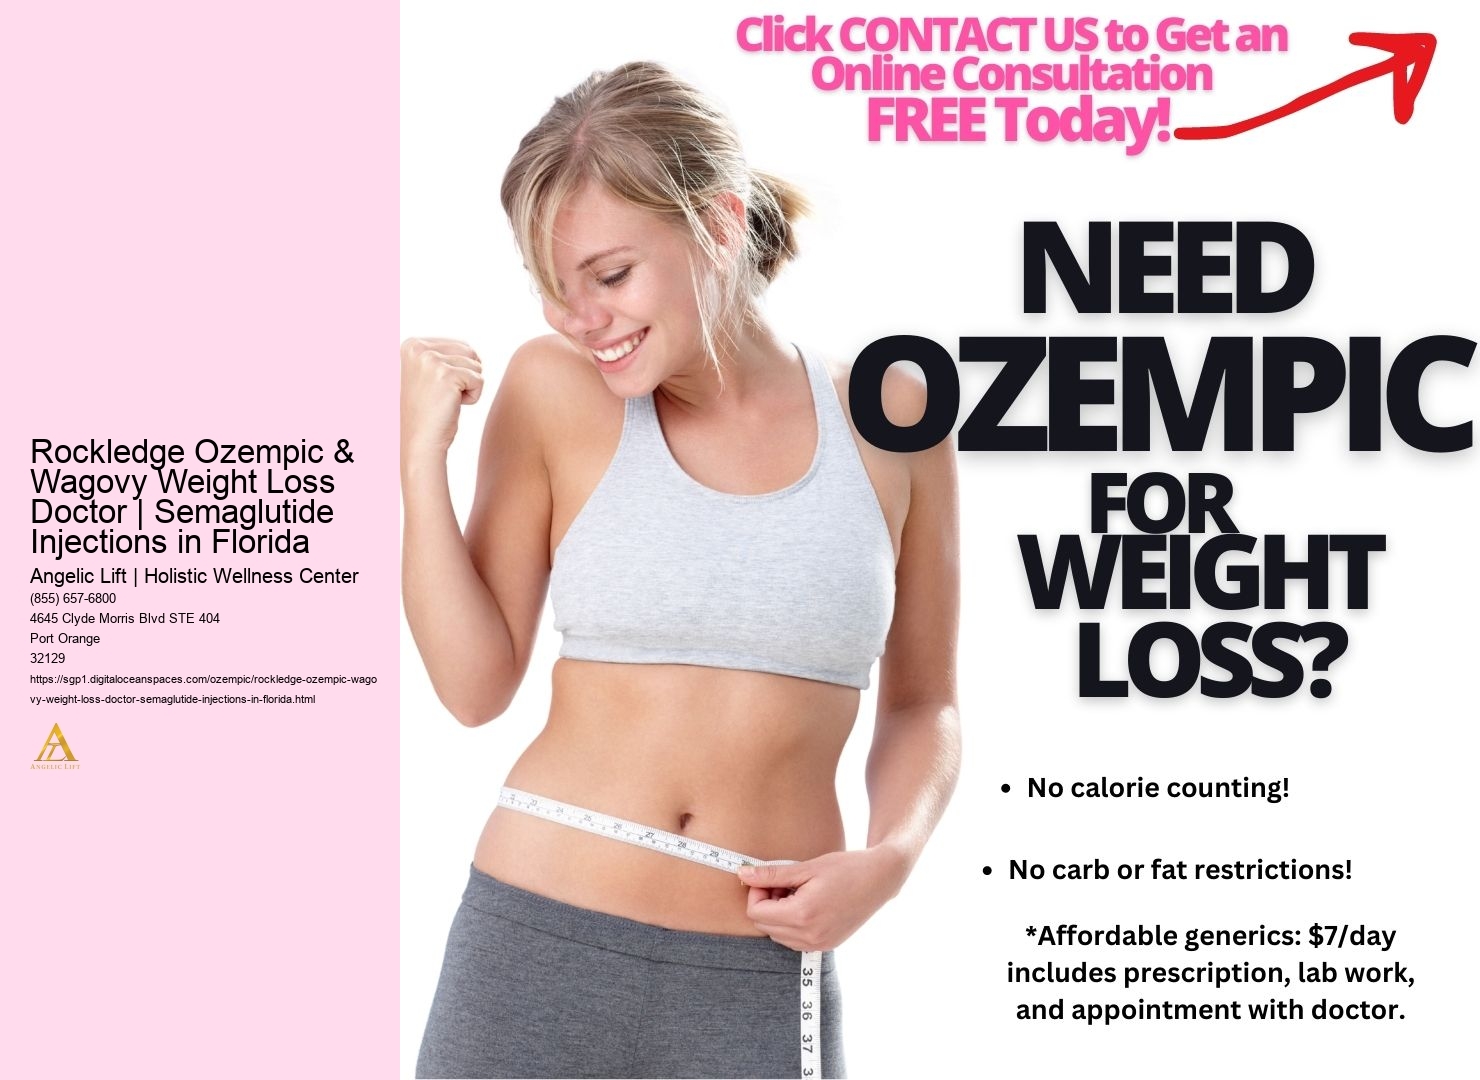 Rockledge Ozempic & Wagovy Weight Loss Doctor | Semaglutide Injections in Florida